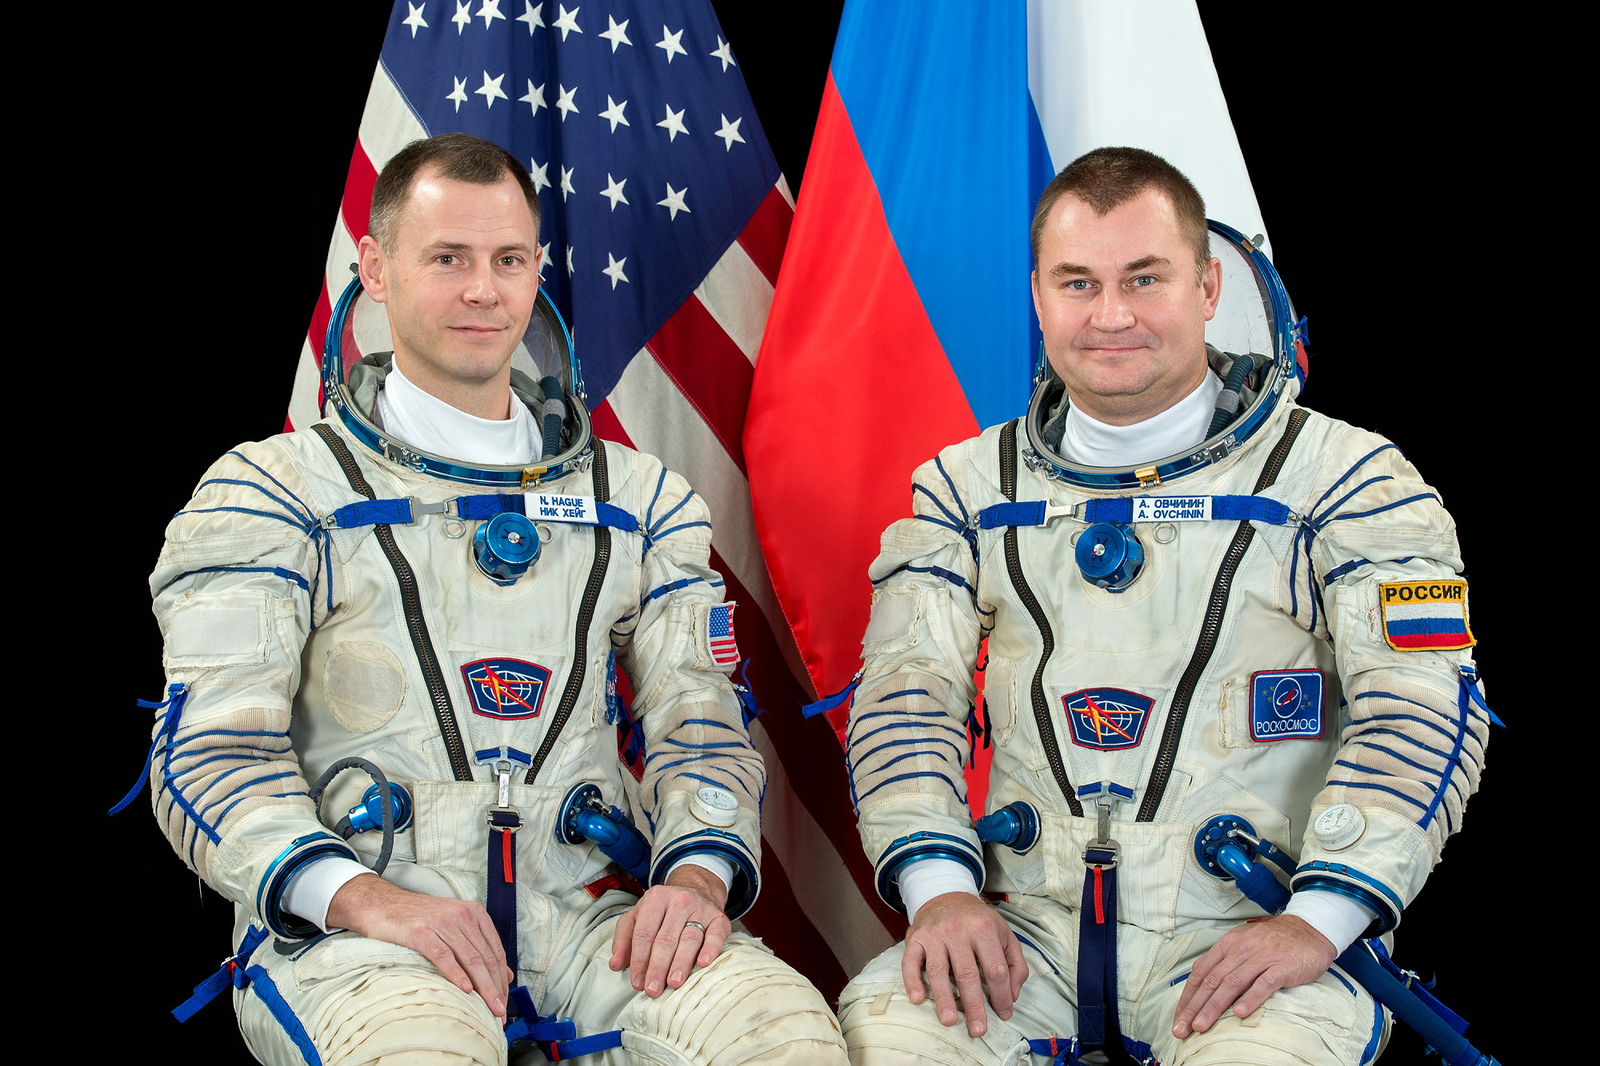 People with iron nerves - Космонавты, Astronaut, ISS, Feat